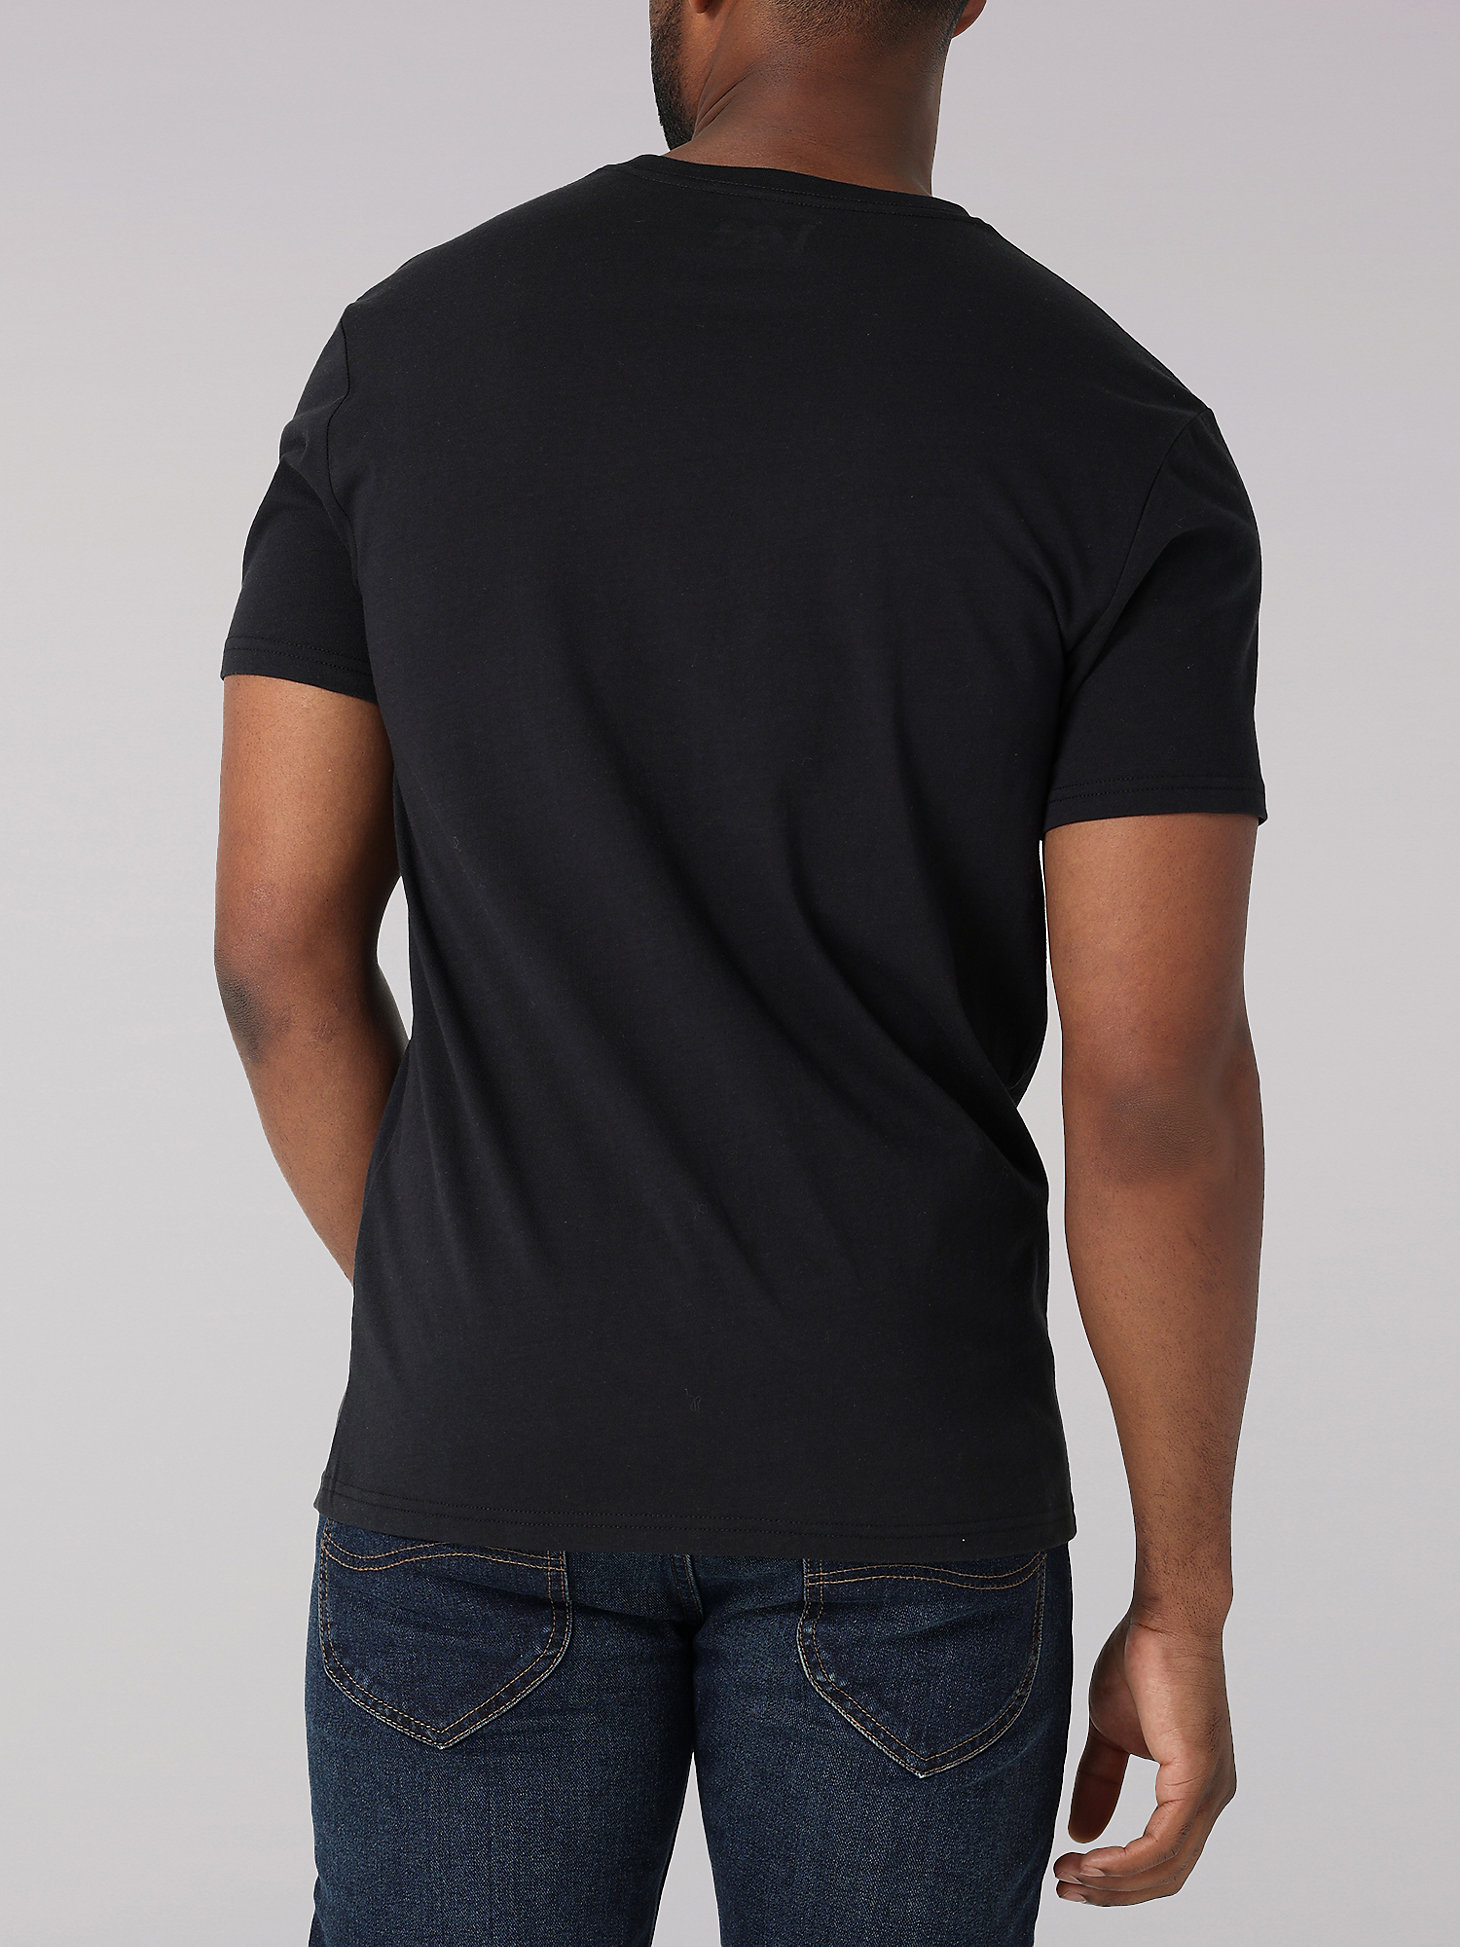 Men's Lee Solid Tee in Washed Black alternative view 1